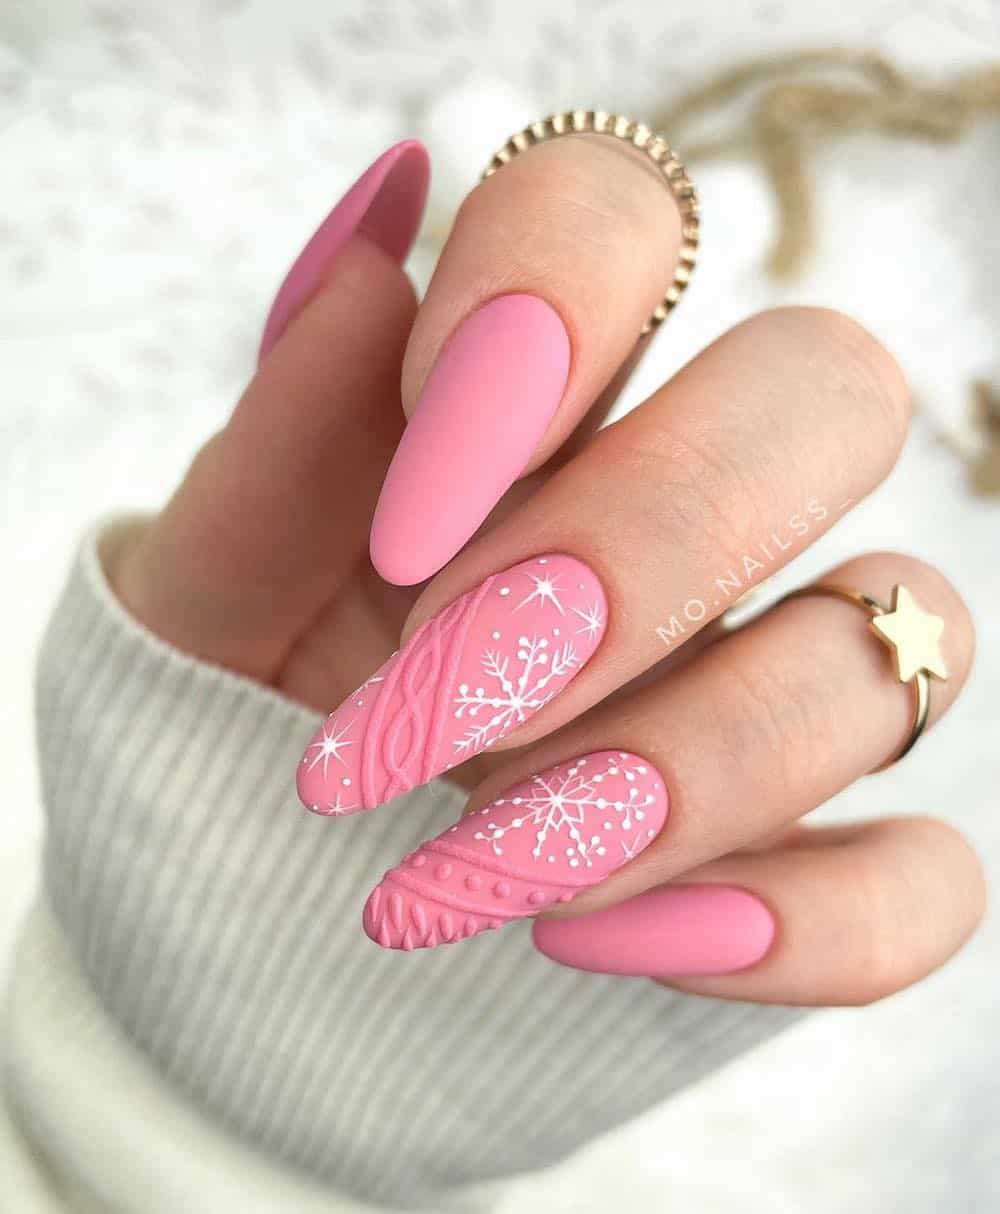 A hand with long almond nails painted a matte light pink with two accent nails featuring sweater details and white snowflakes